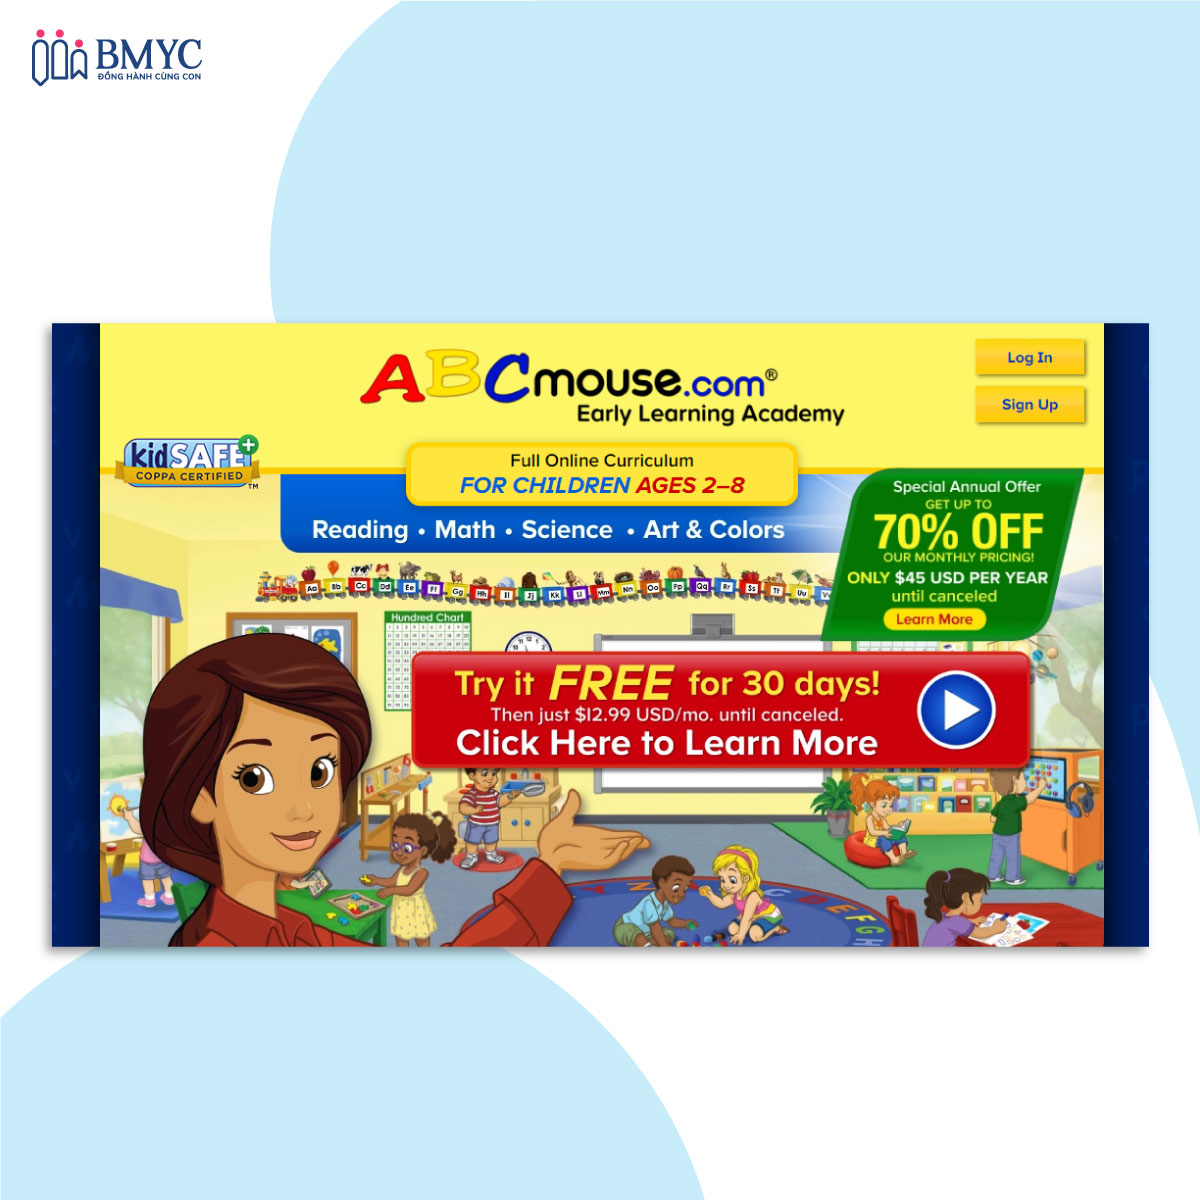 Website luyện đọc tiếng Anh ABCmouse 